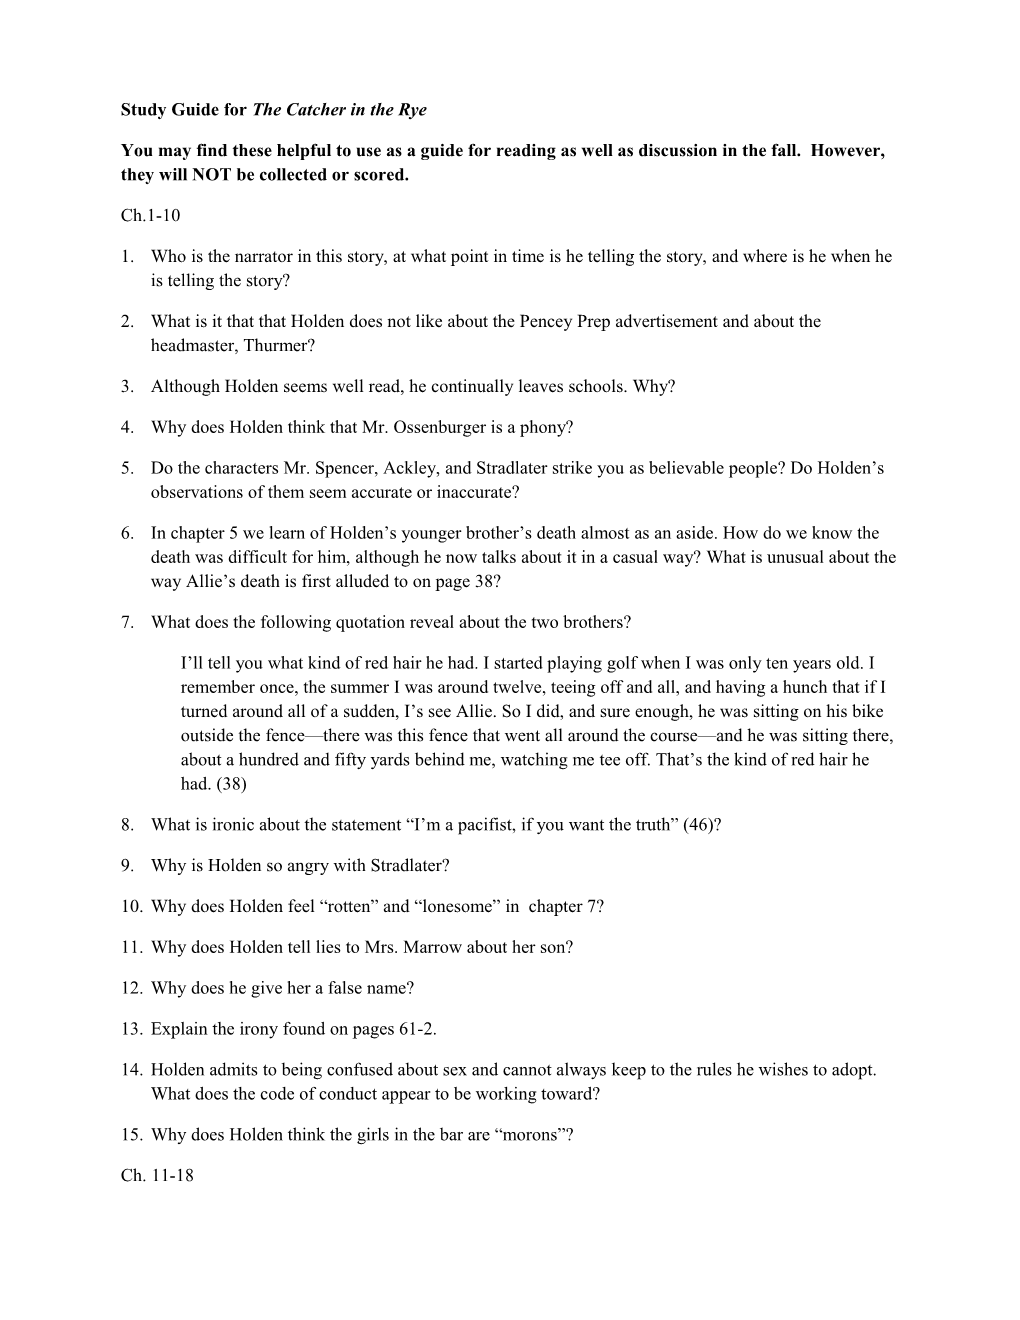 Study Guide for the Catcher in the Rye